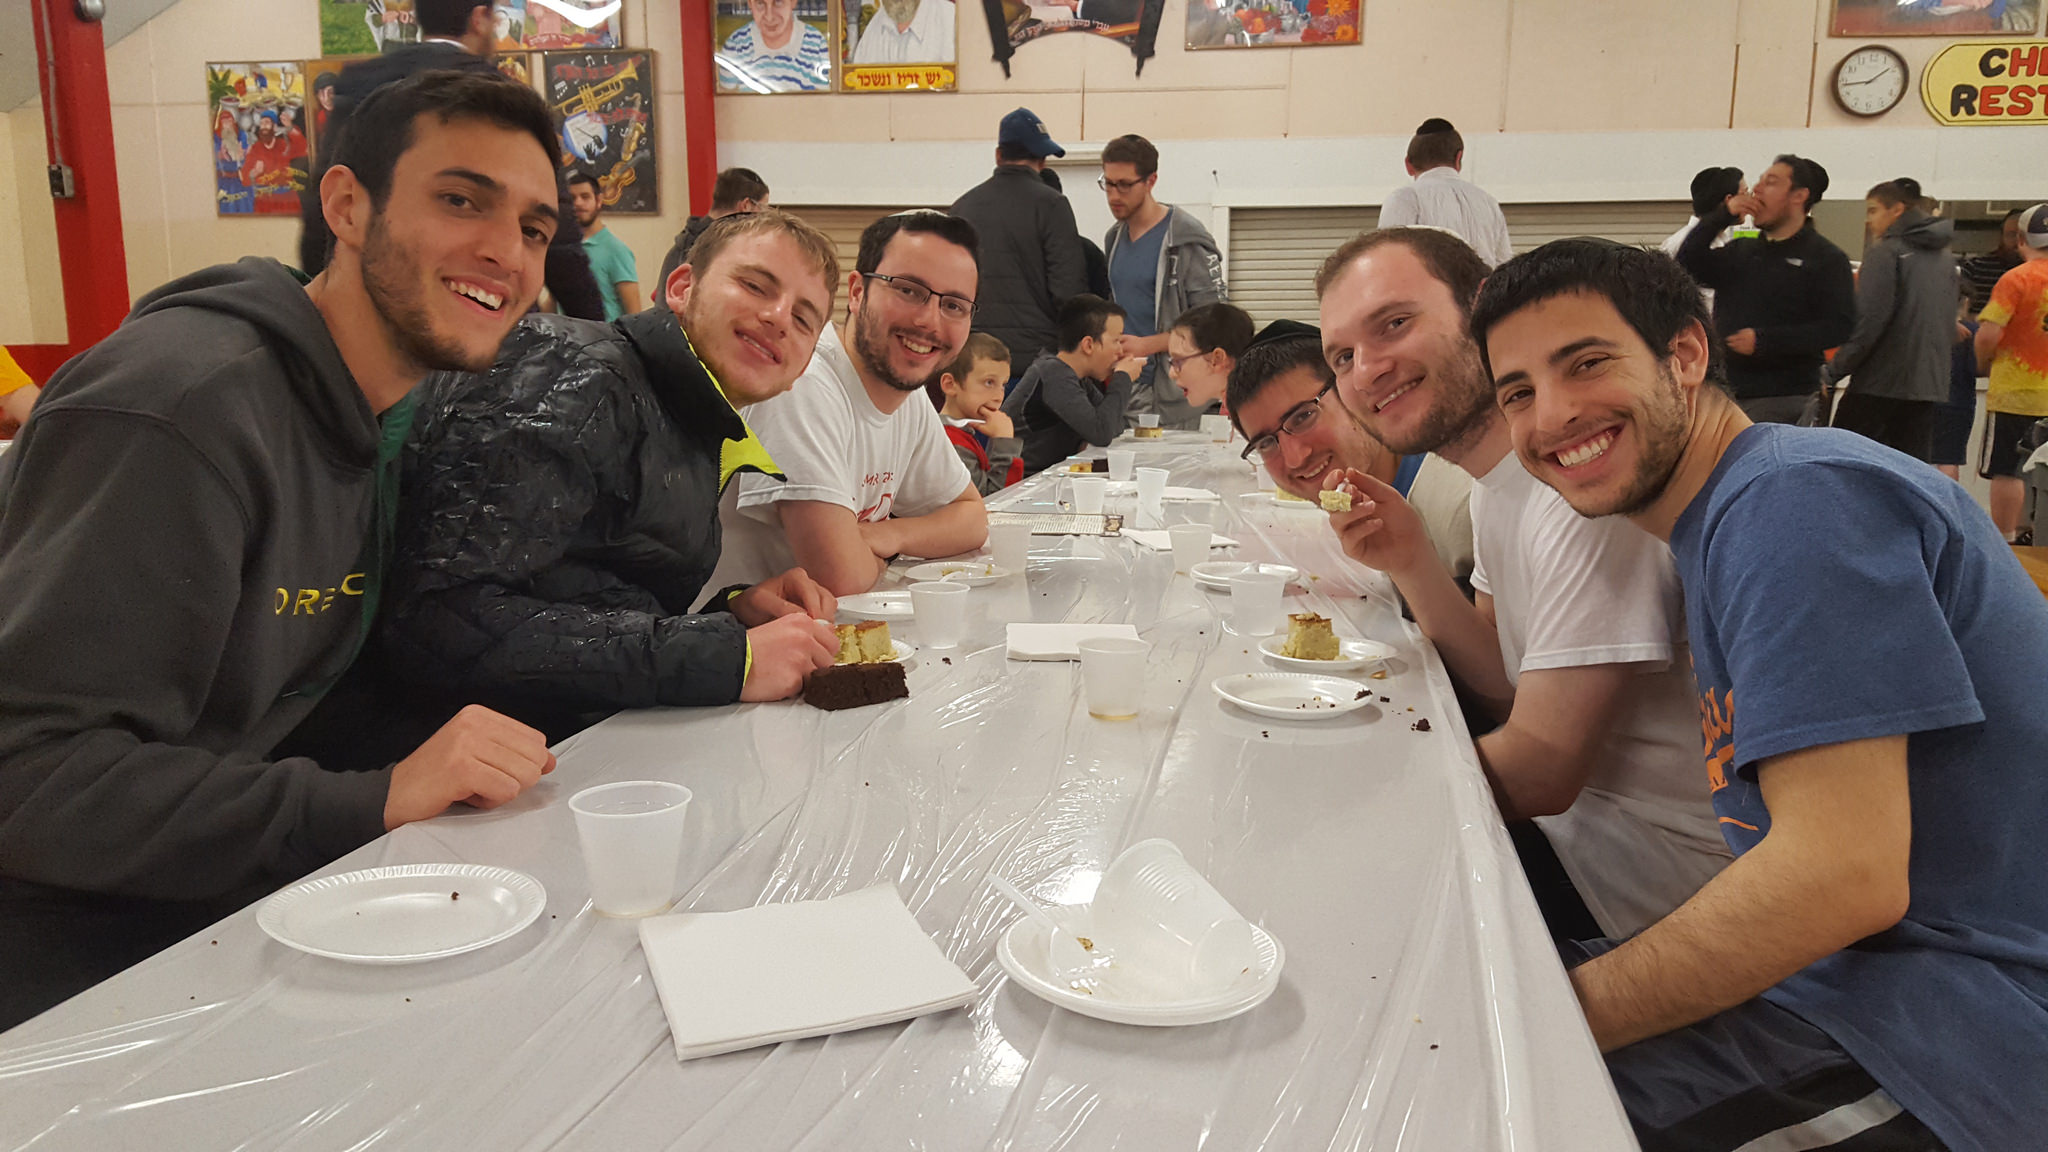 Students at LCM smile during LCM's annual Shabbaton.